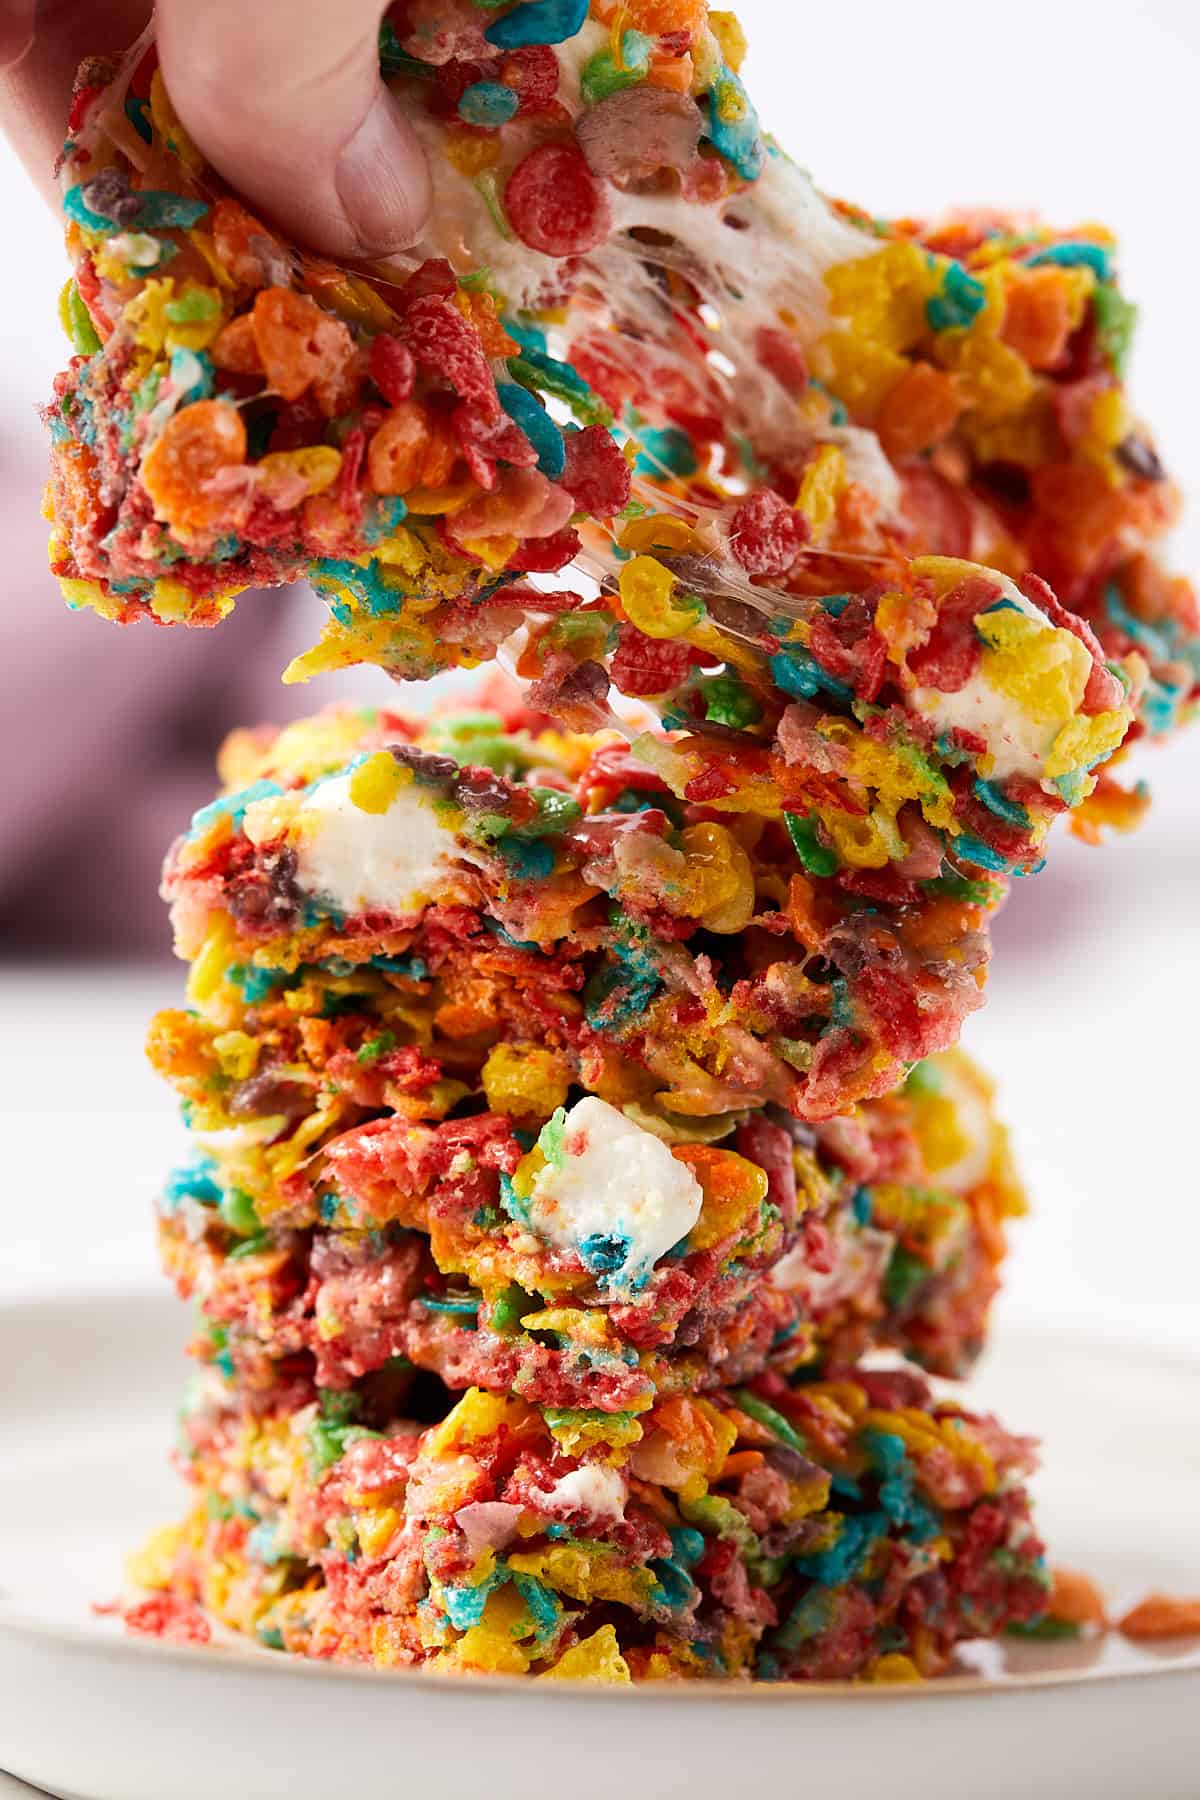 Fruity pebbles marshmallow treats stacked on top of each other with the top one being pulled a part.